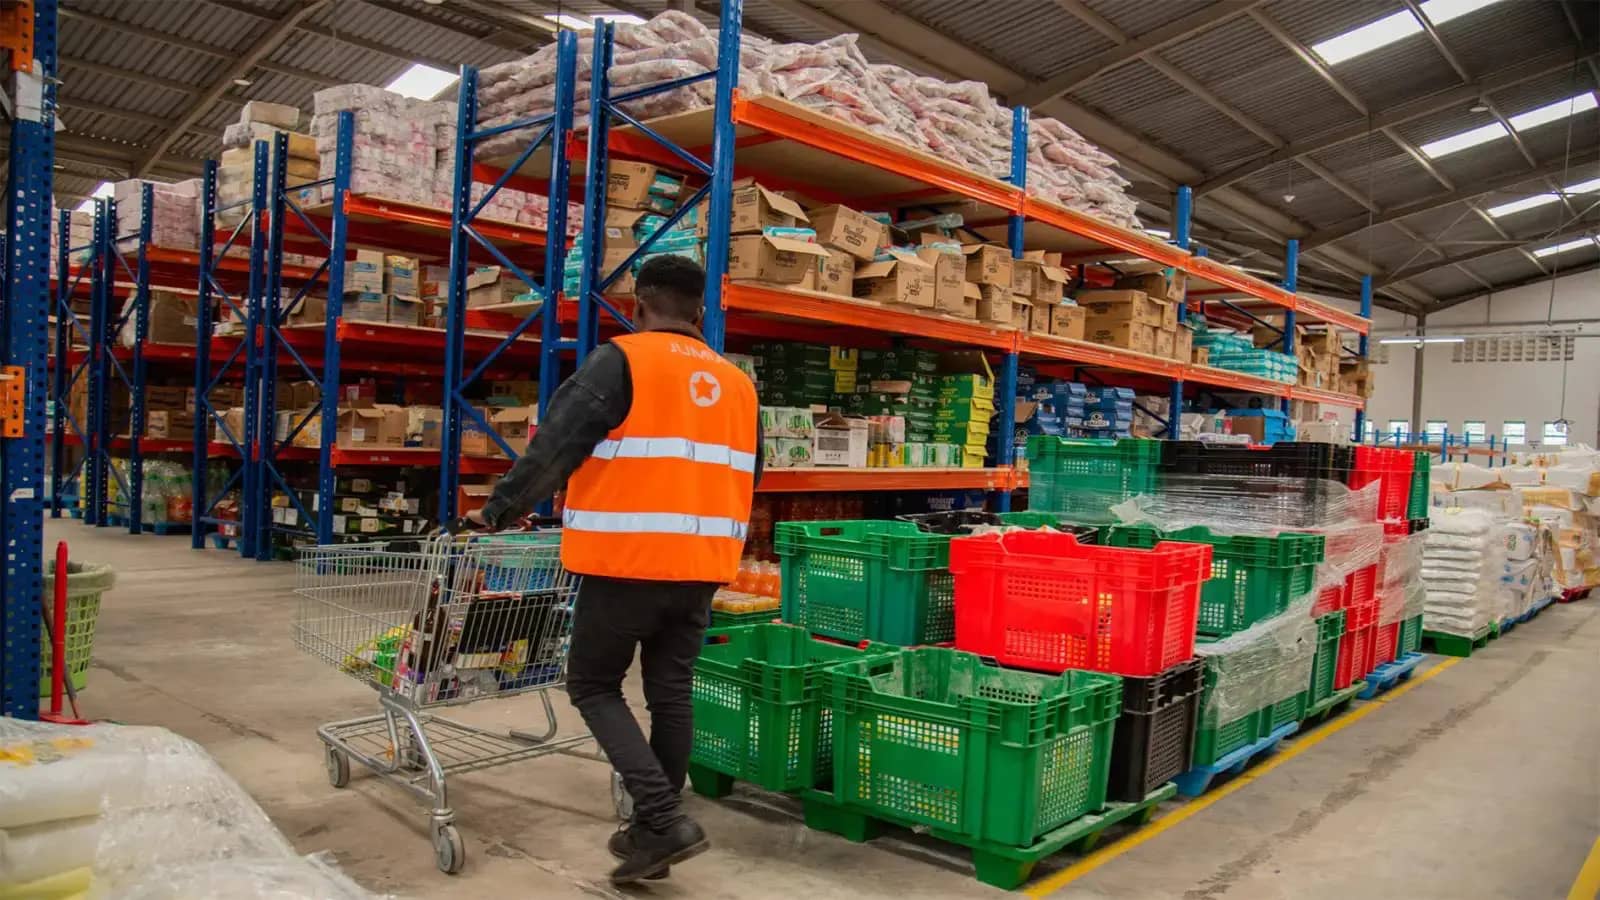 E-commerce platform Jumia opens new warehouse, logistics facility in Kenya to speed delivery time